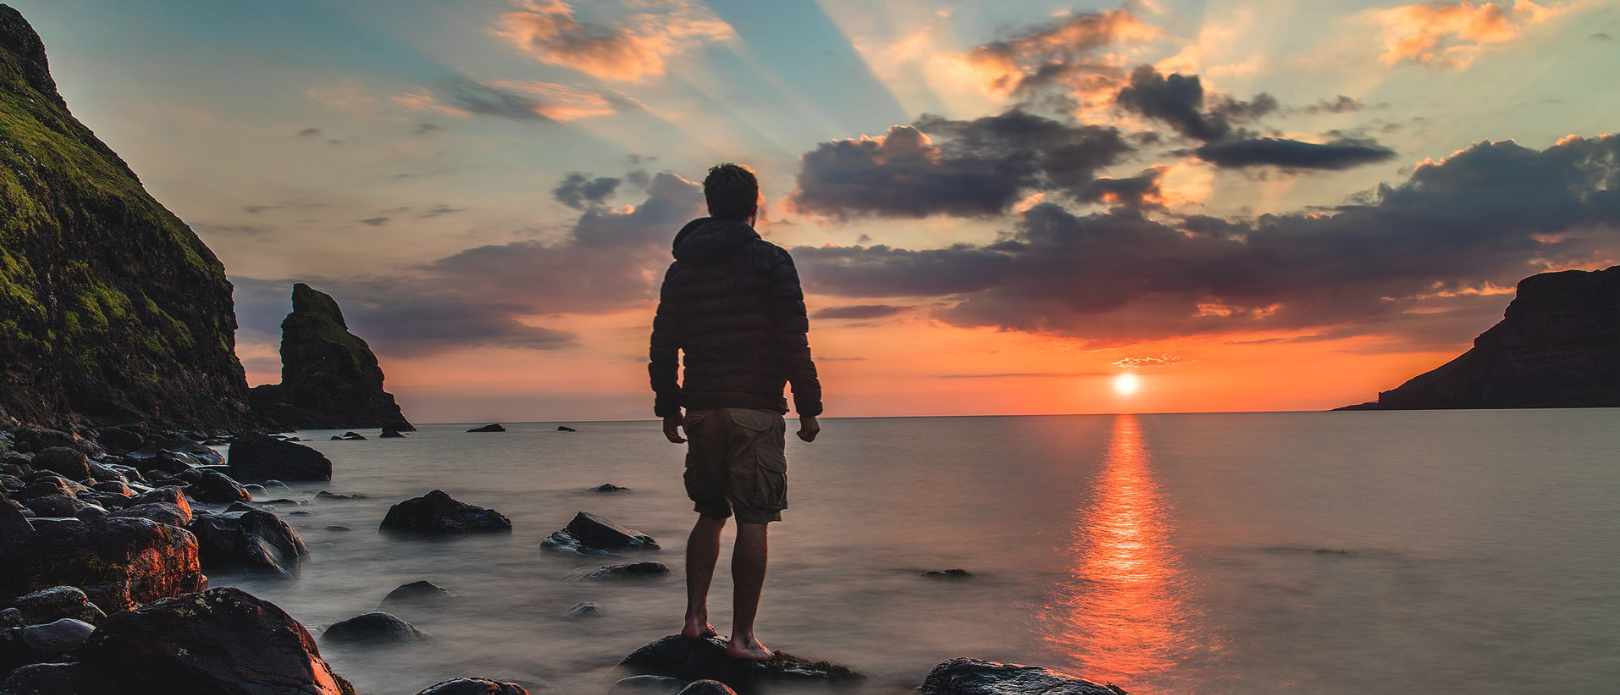 Man standing on stone looking at sunset by sea